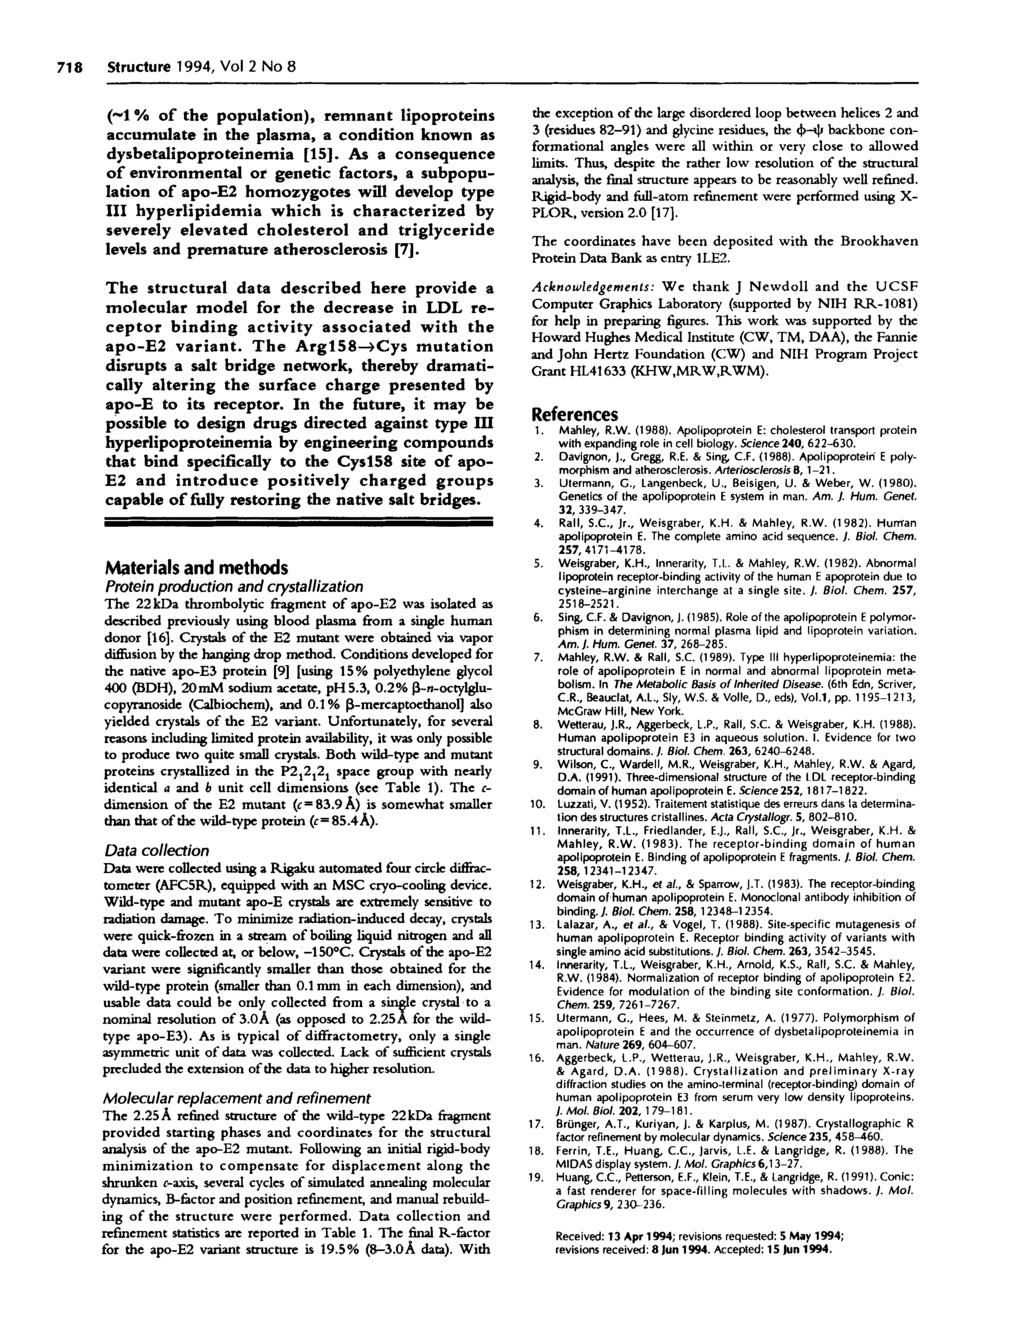 718 Structure 1994, Vol 2 No 8 (~1 % of the population), remnant lipoproteins accumulate in the plasma, a condition known as dysbetalipoproteinemia [15].